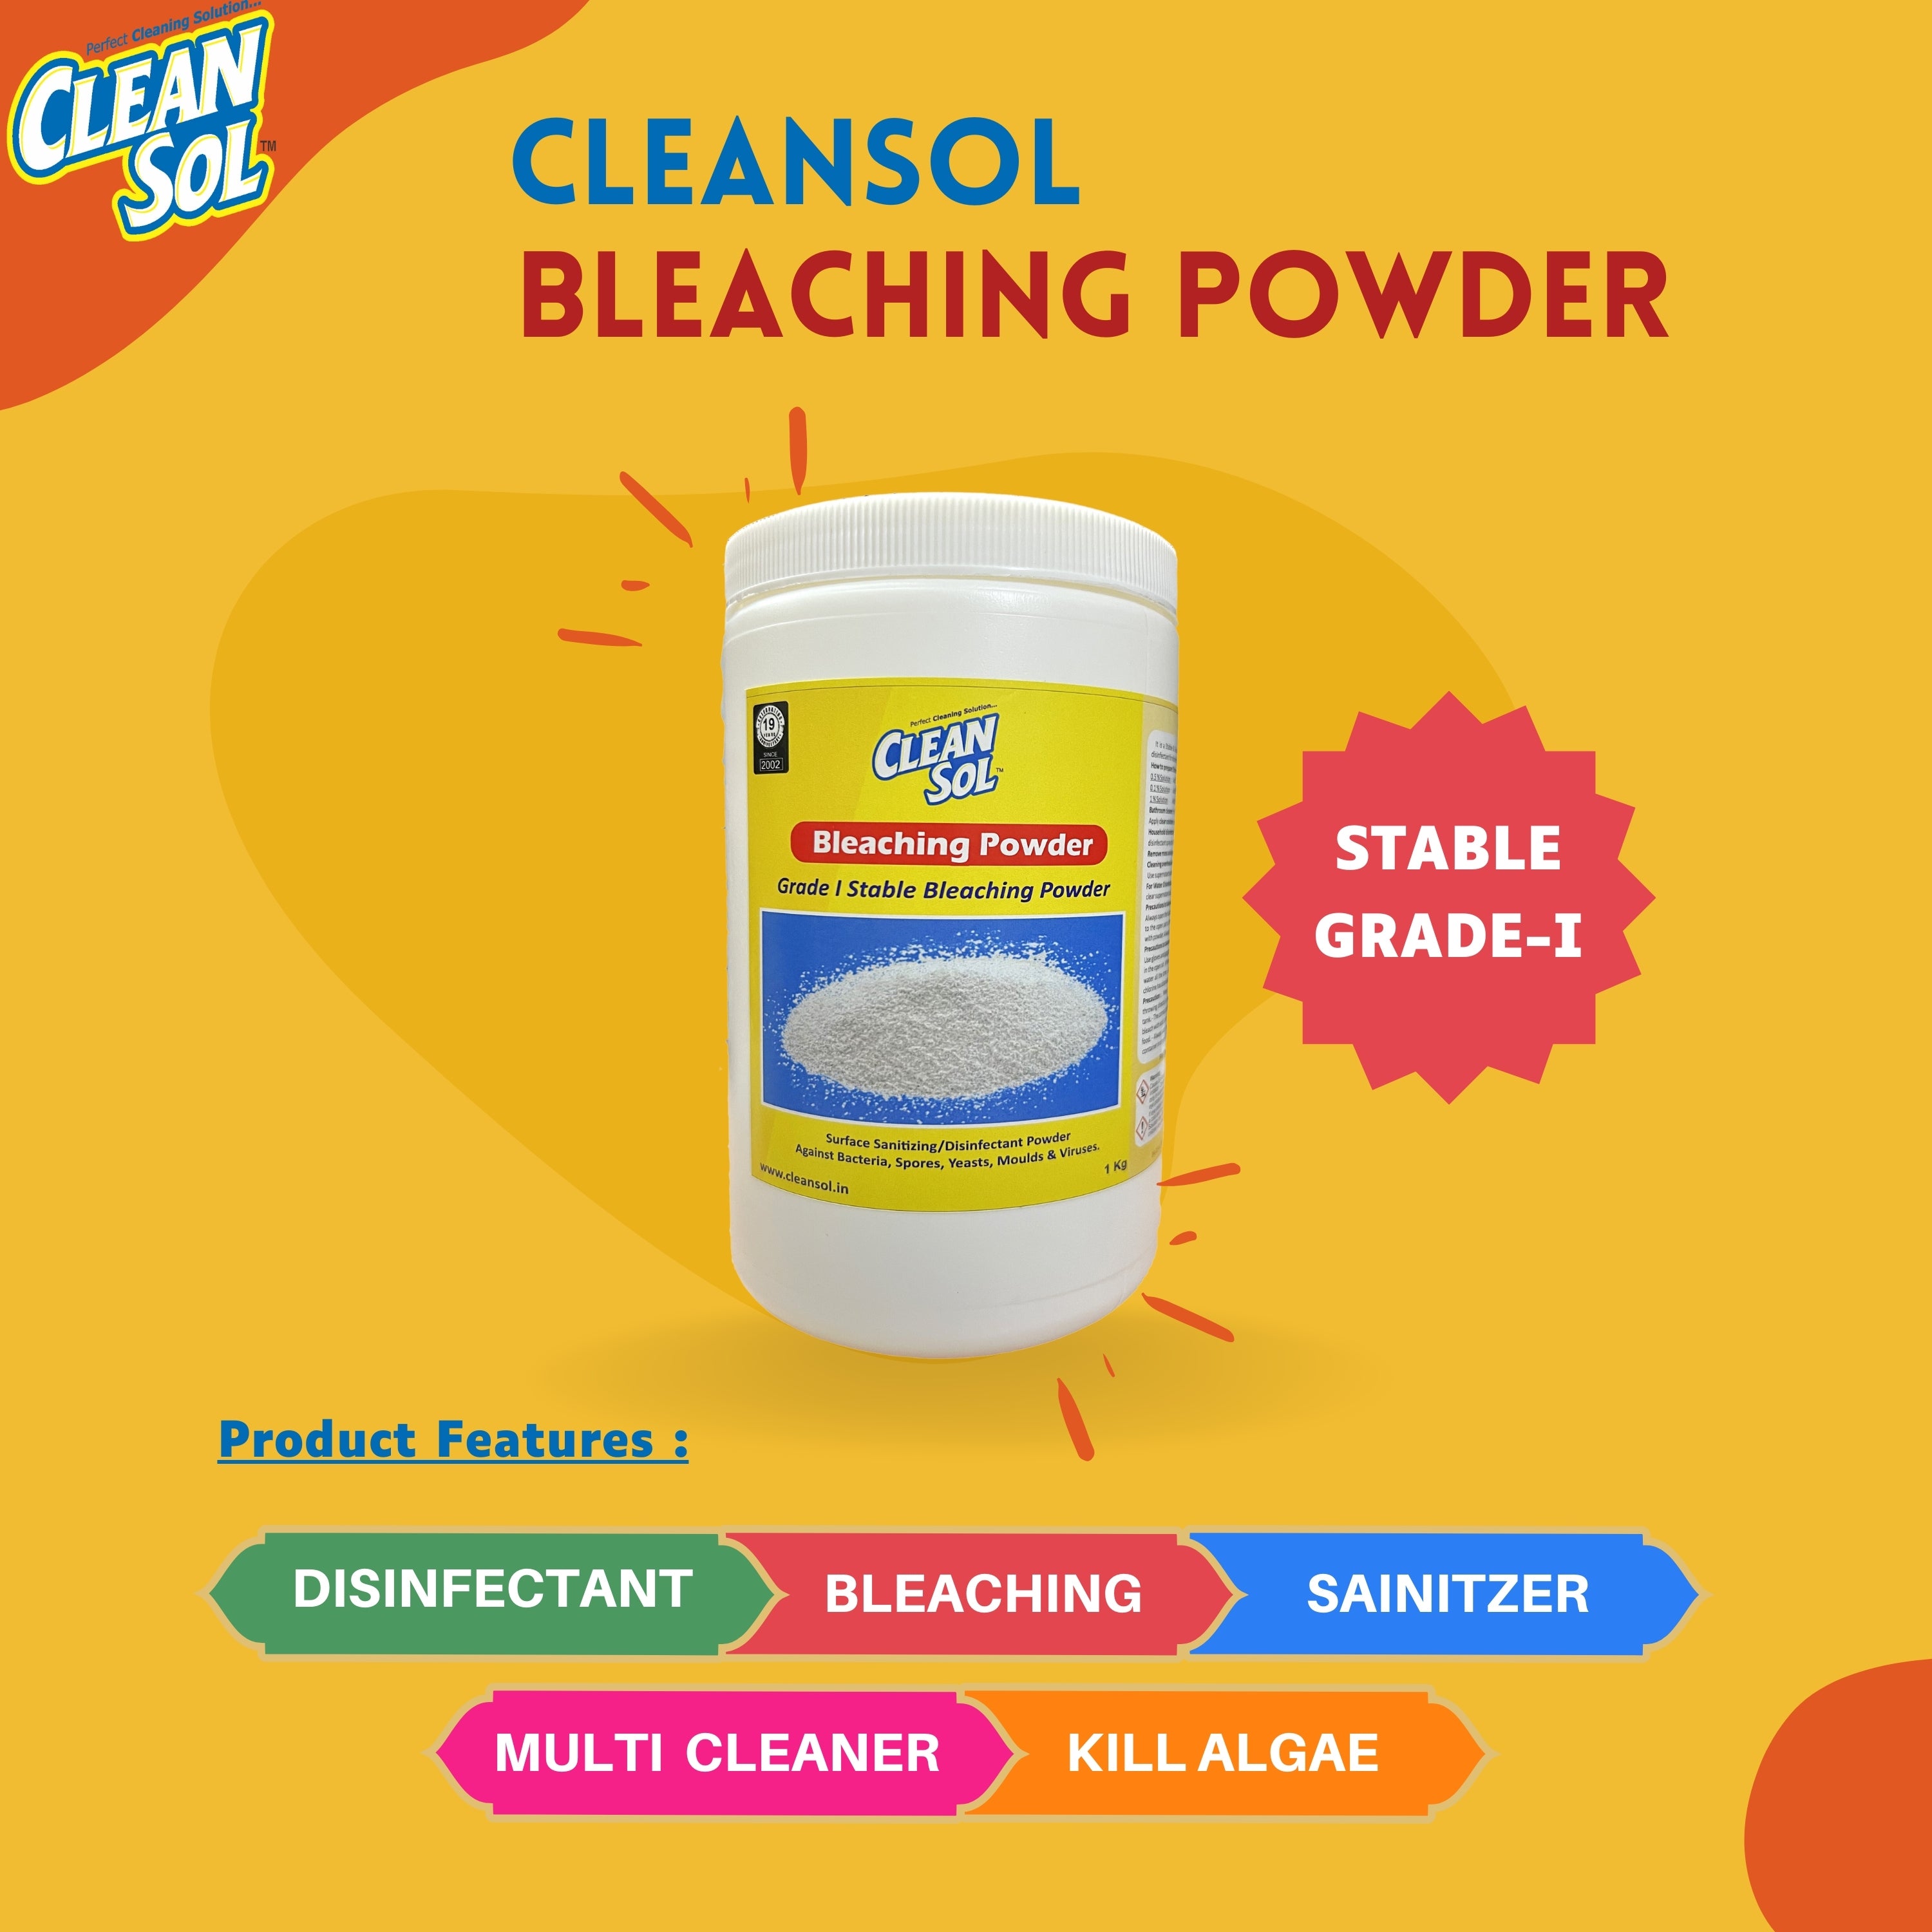 Cleansol Bleaching Powder Disinfectant